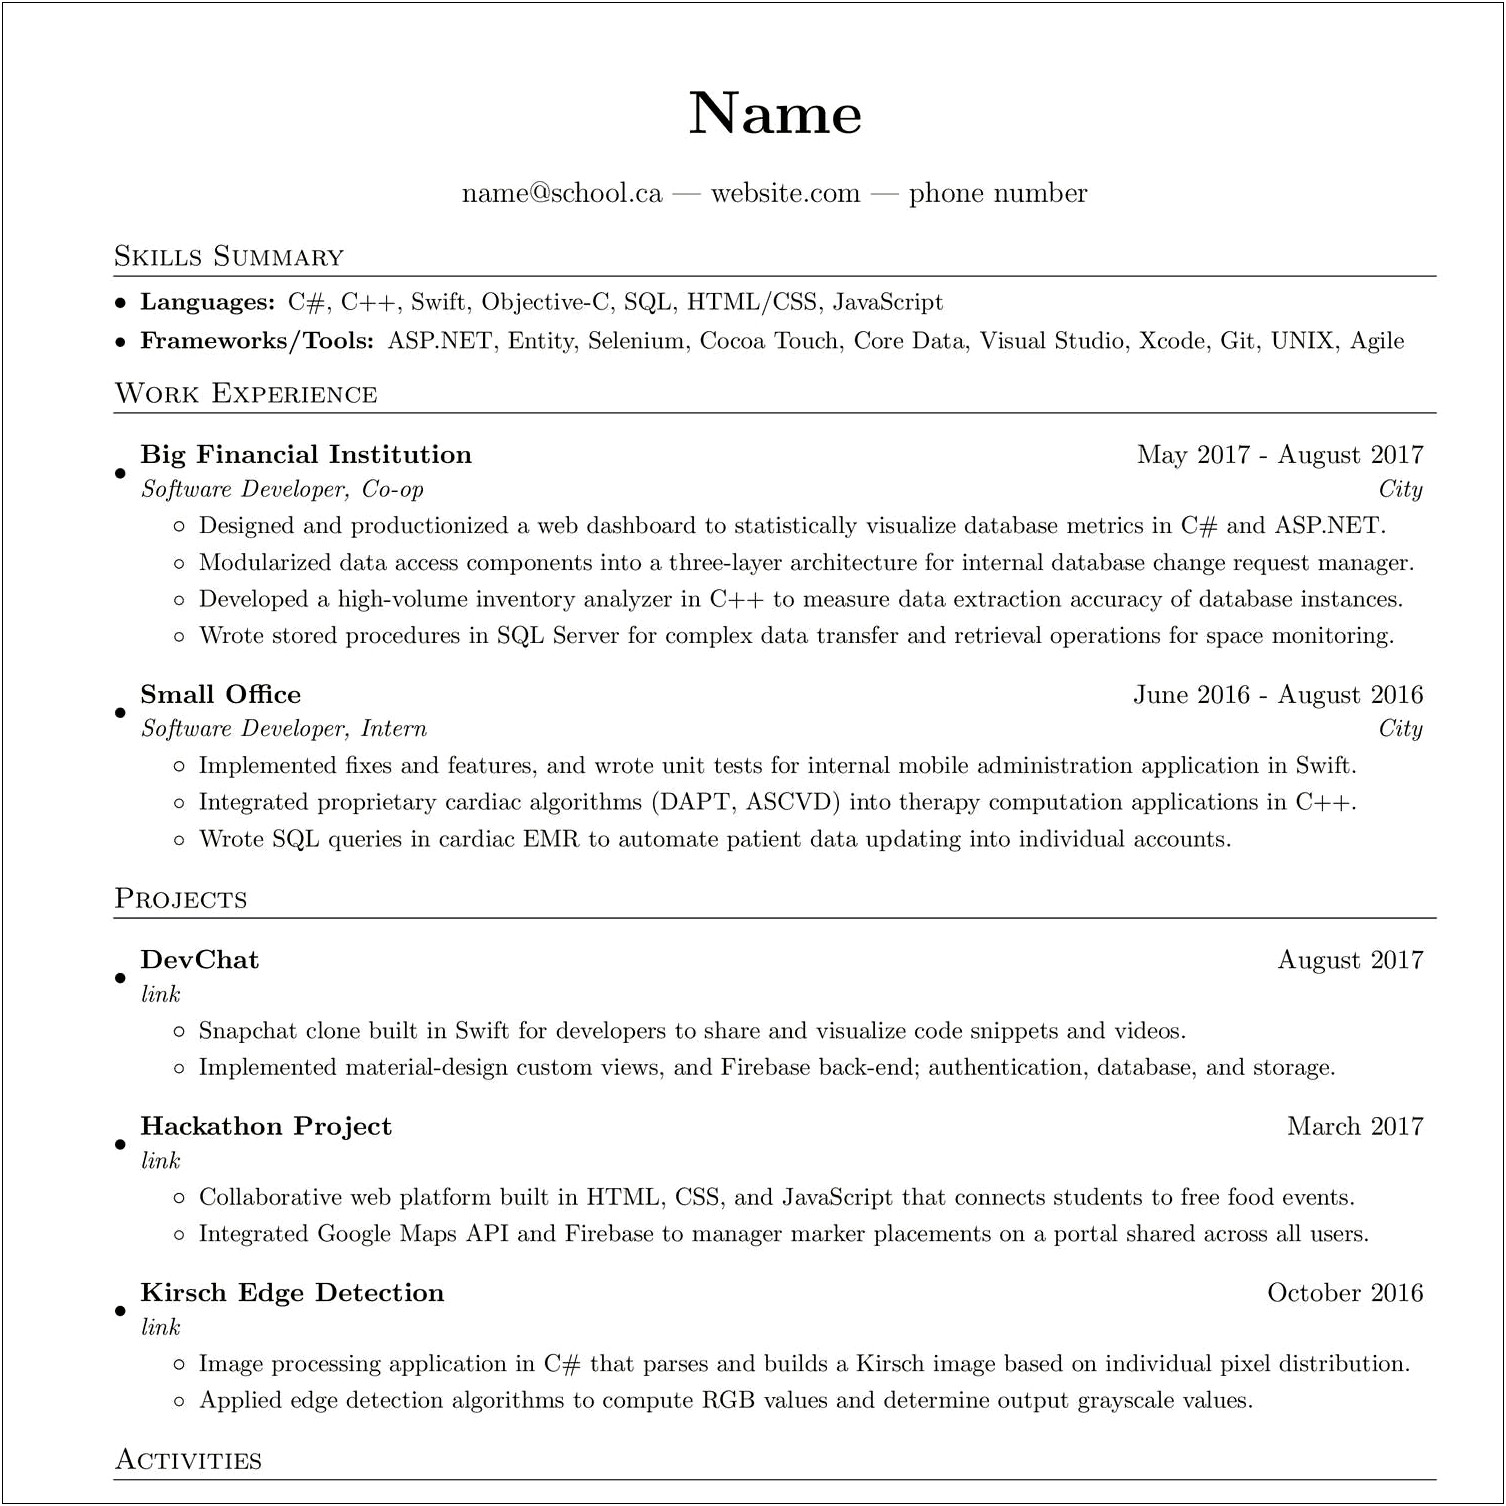 Coding Projects That Look Good On Resumes Reddit